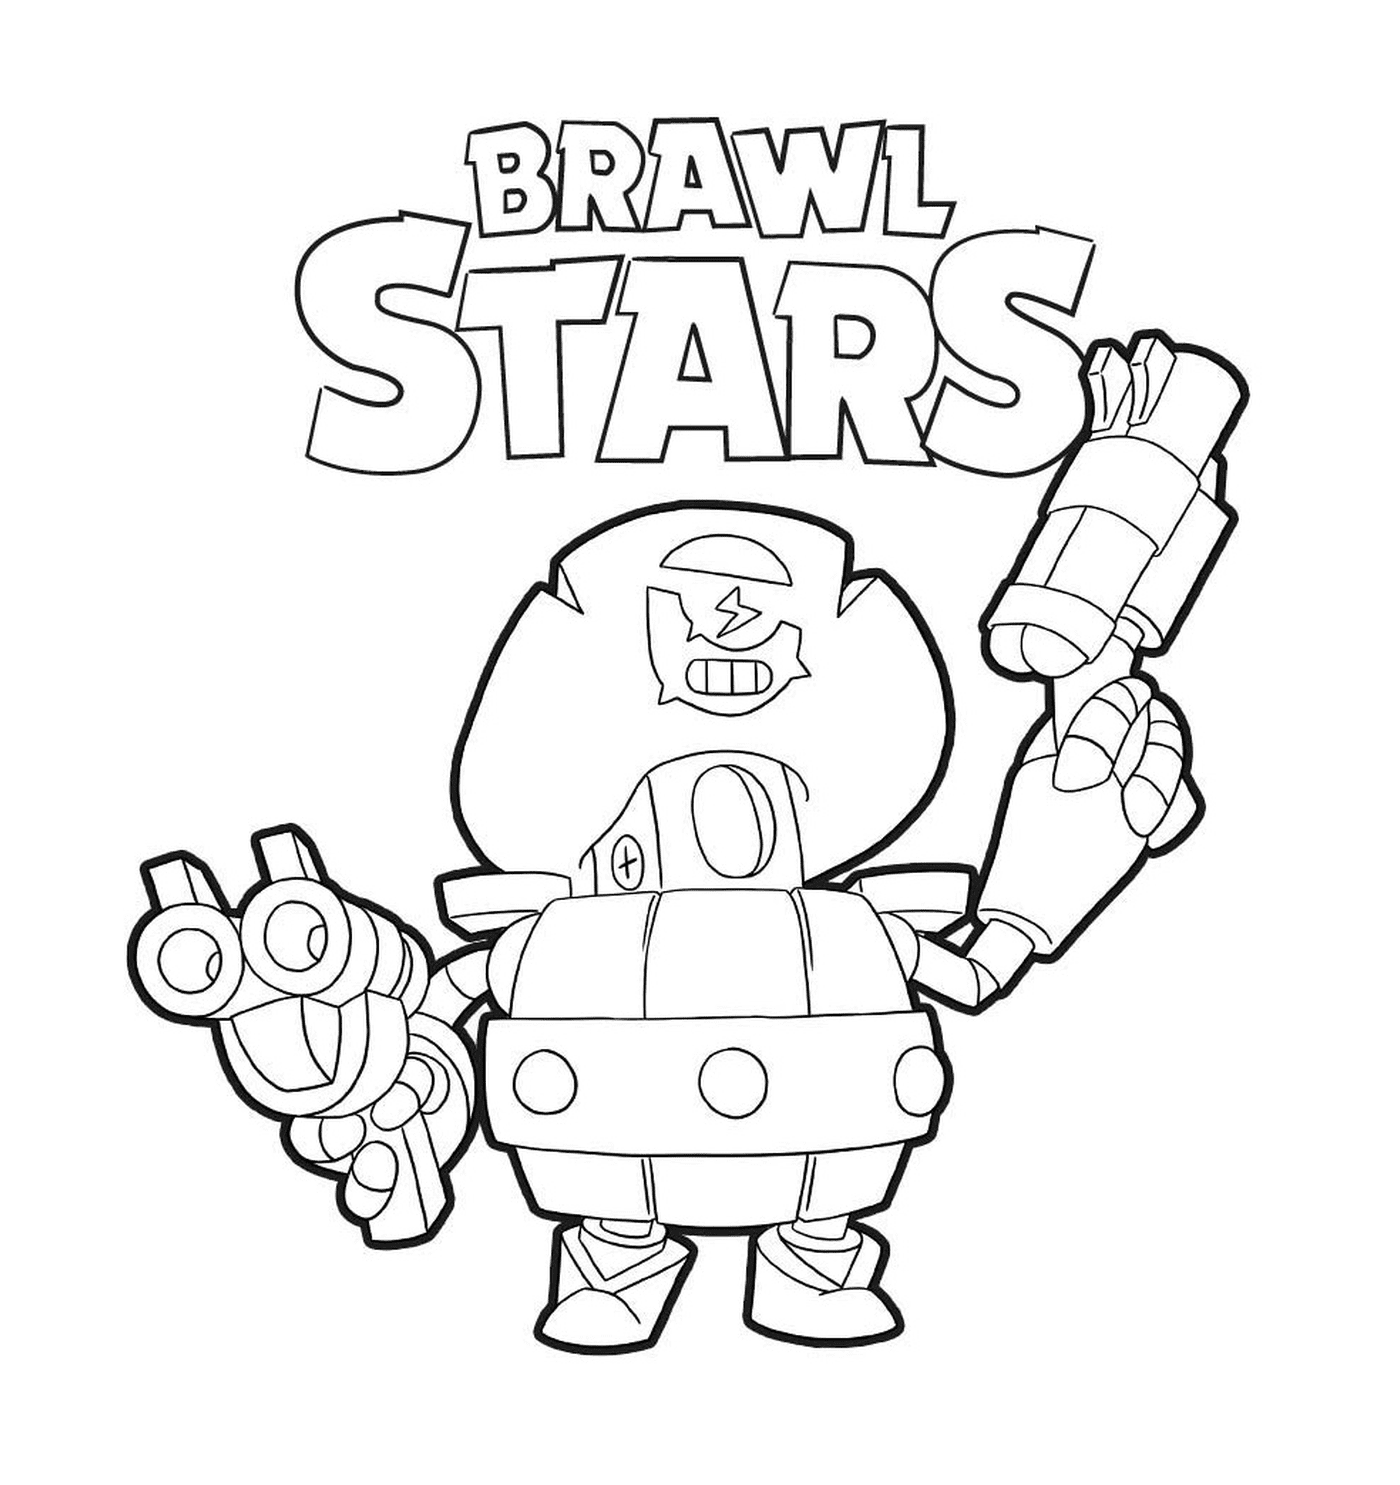  A character from Brawl Stars named Daryl 